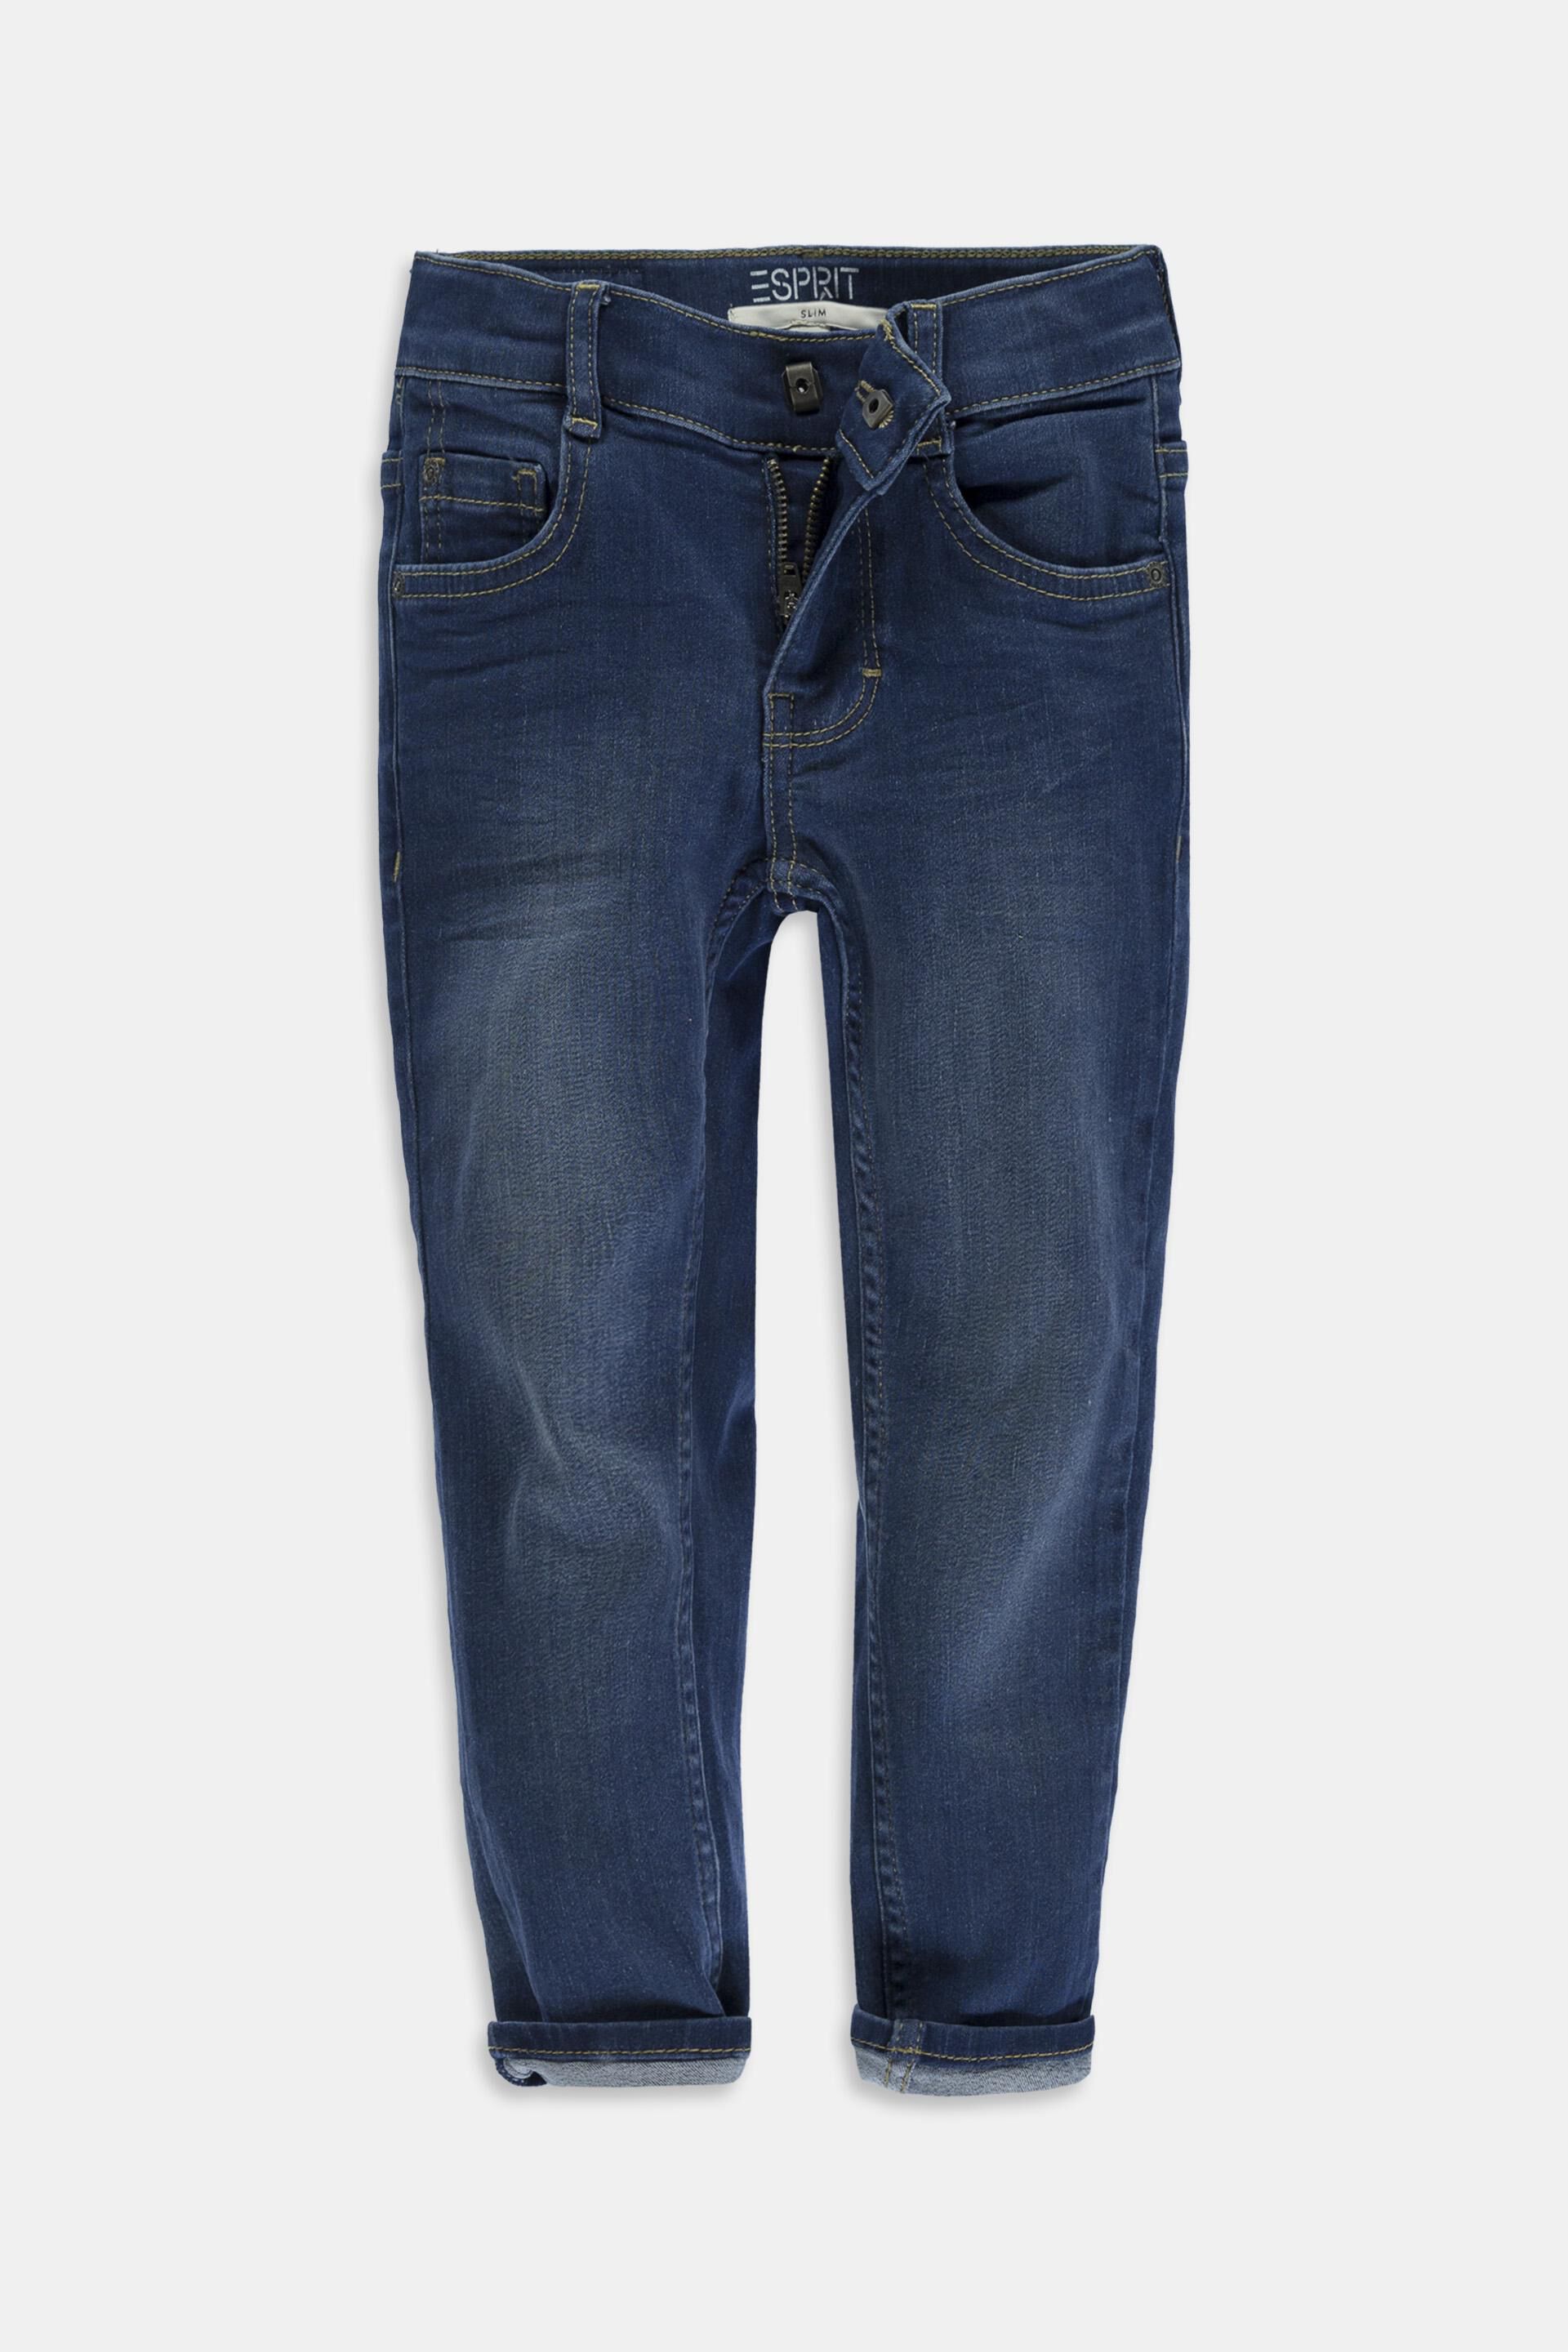 Edc By Esprit Stretch jeans available in different widths with an adjustable waistband